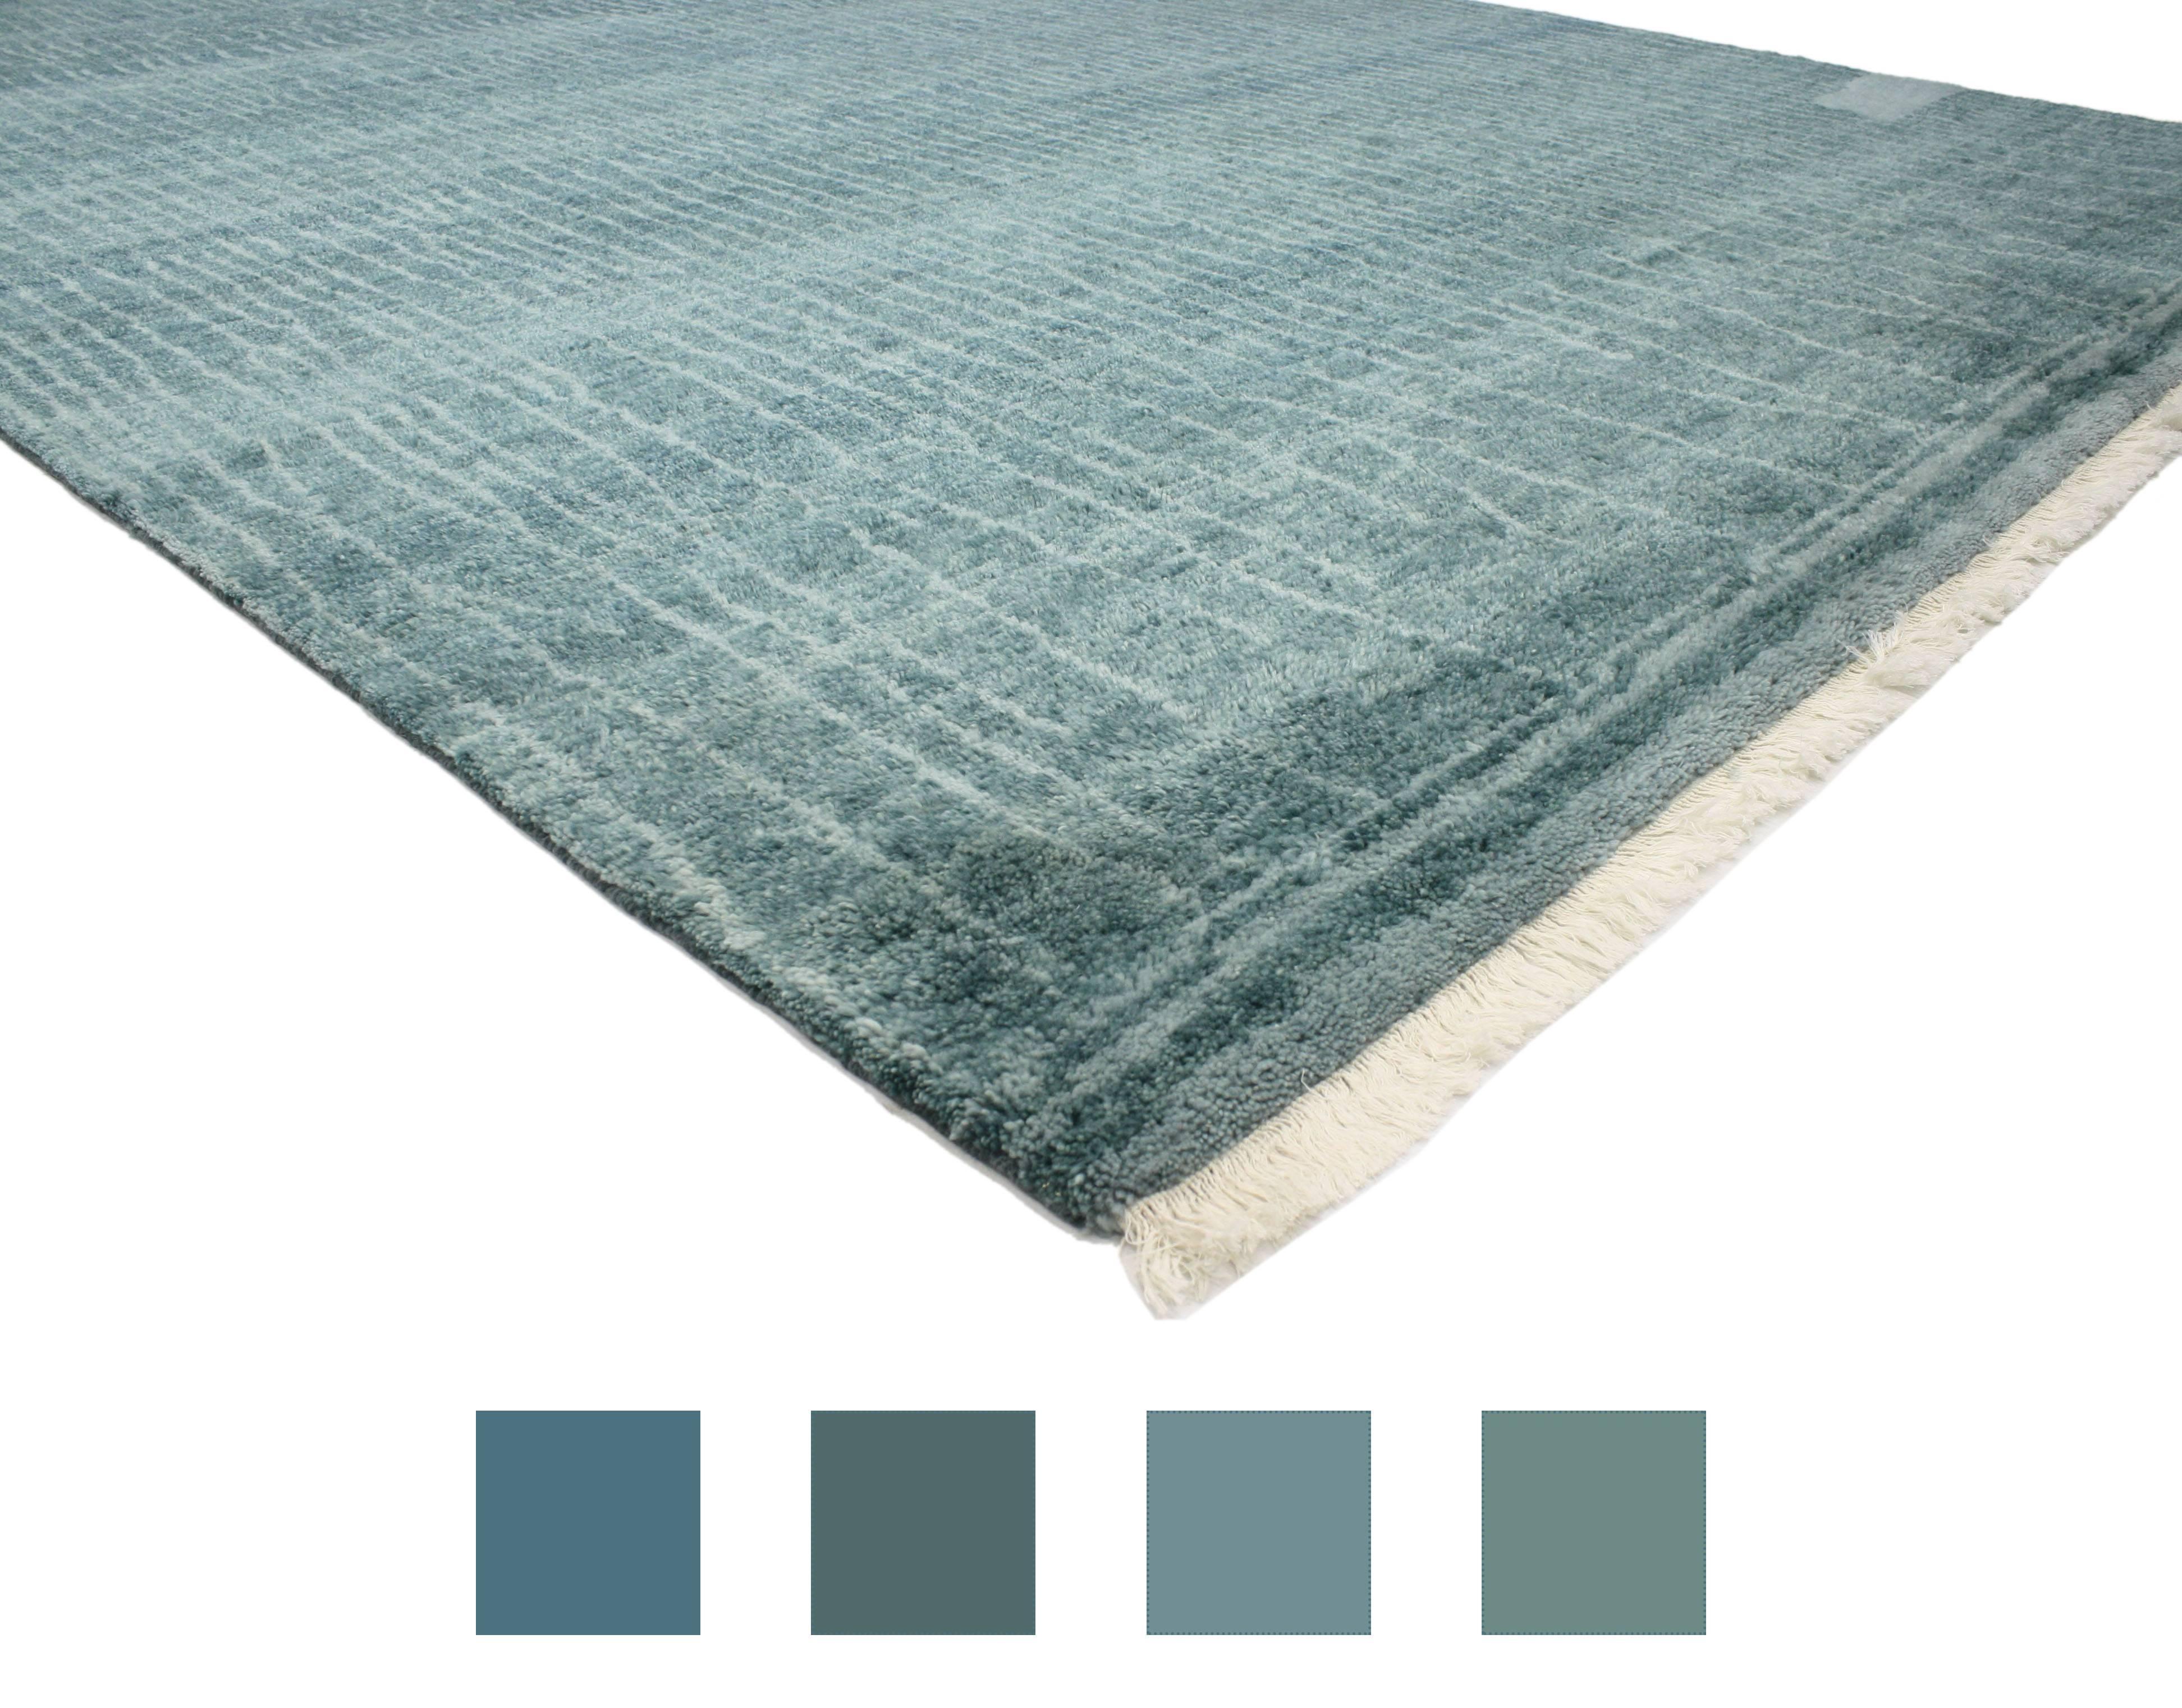 Post-Modern New Contemporary Moroccan Area Rug with Coastal Postmodern and Beach Hygge Style